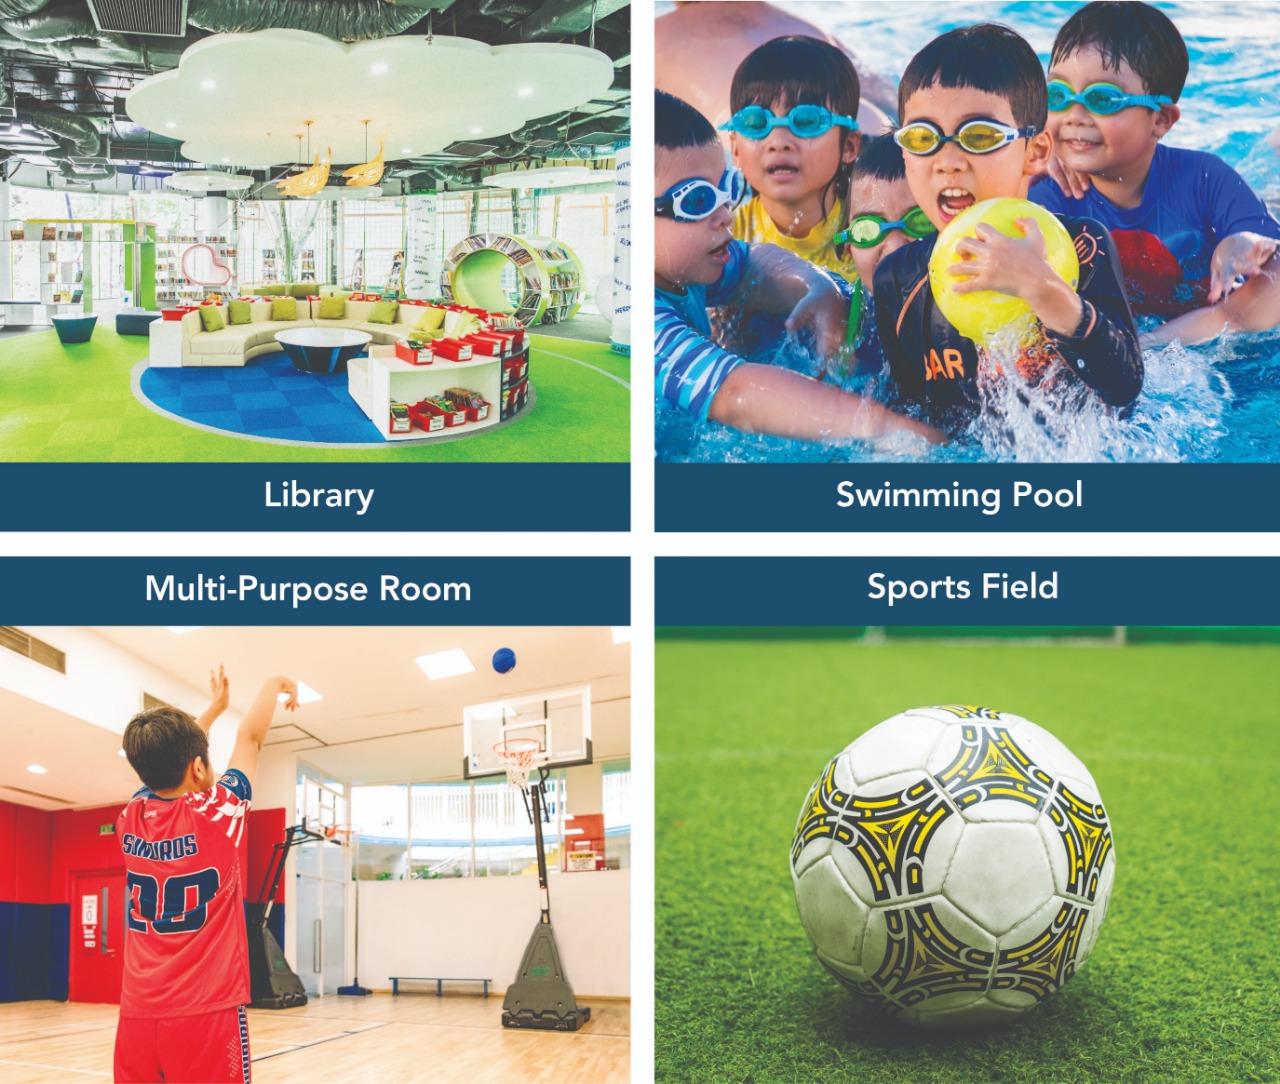 Consider facilities and culture of international school